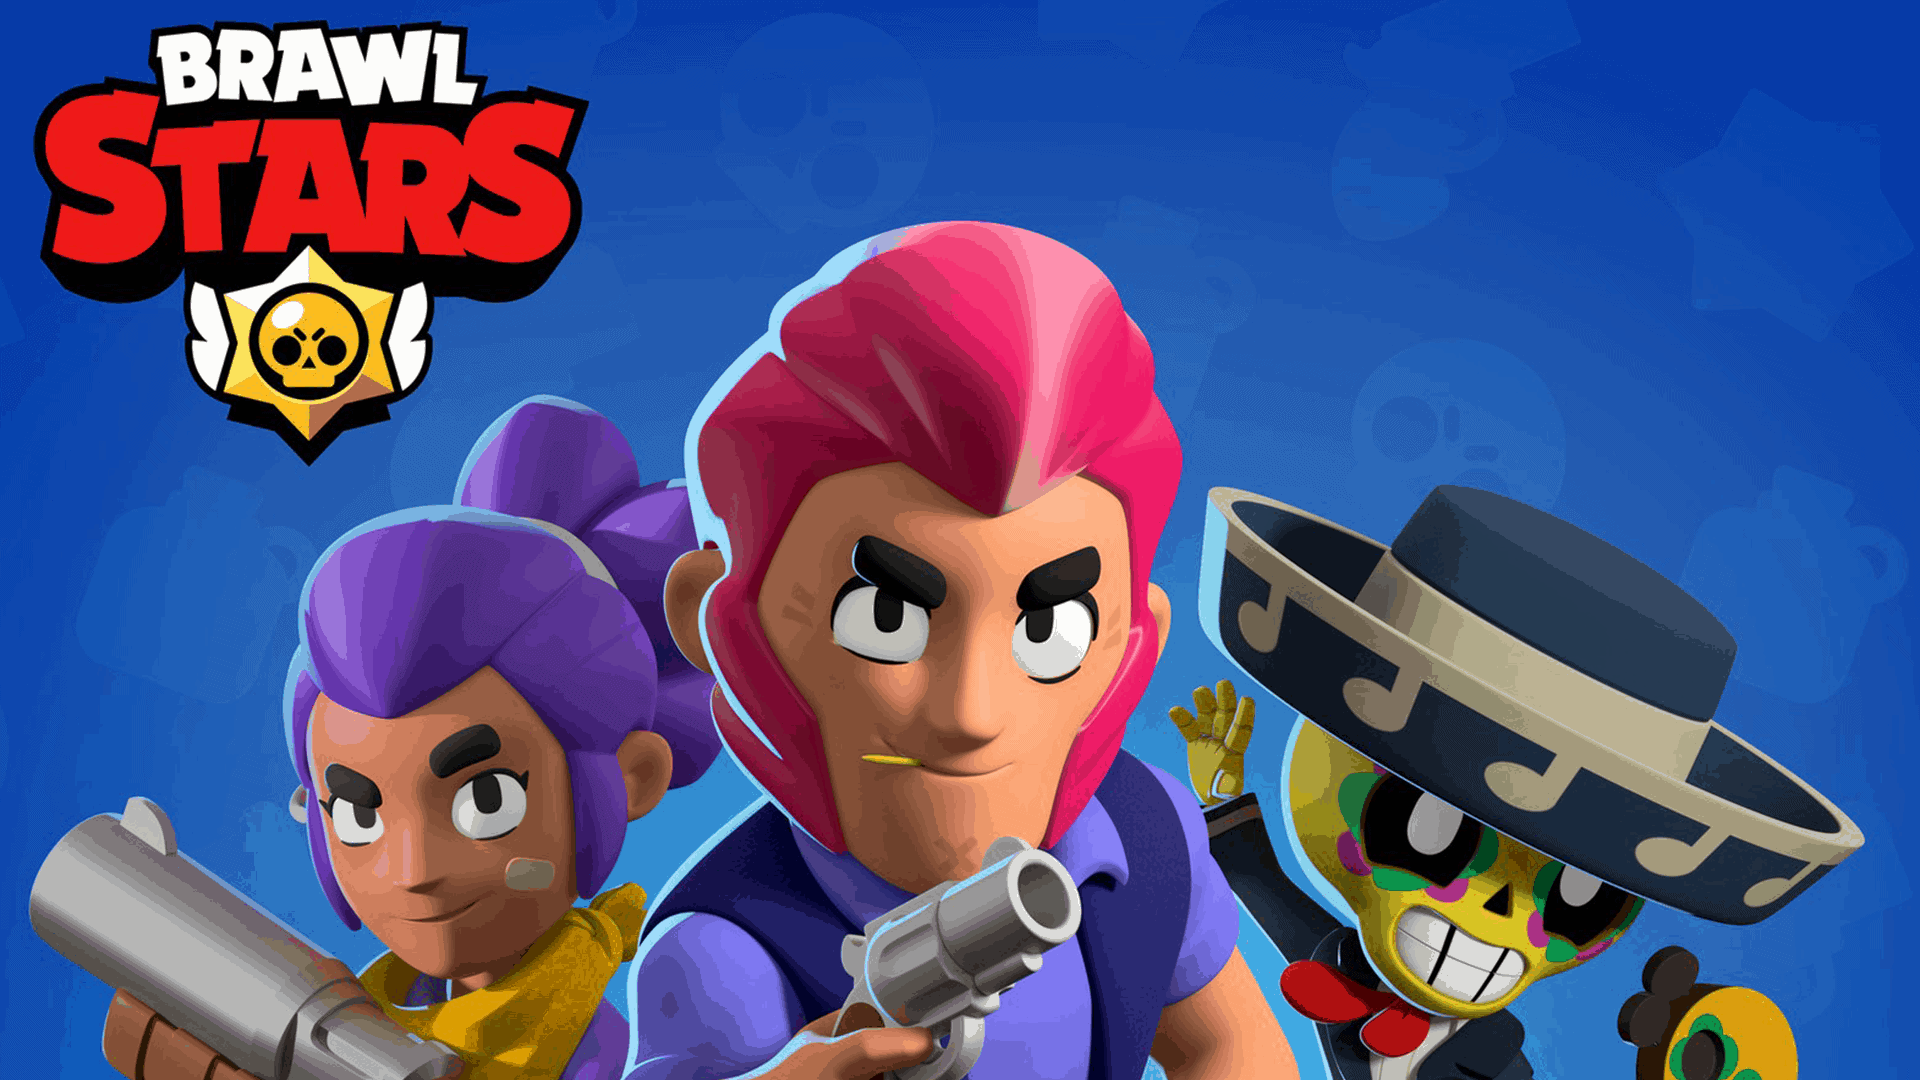 Brawl Stars information about the game - wiki page